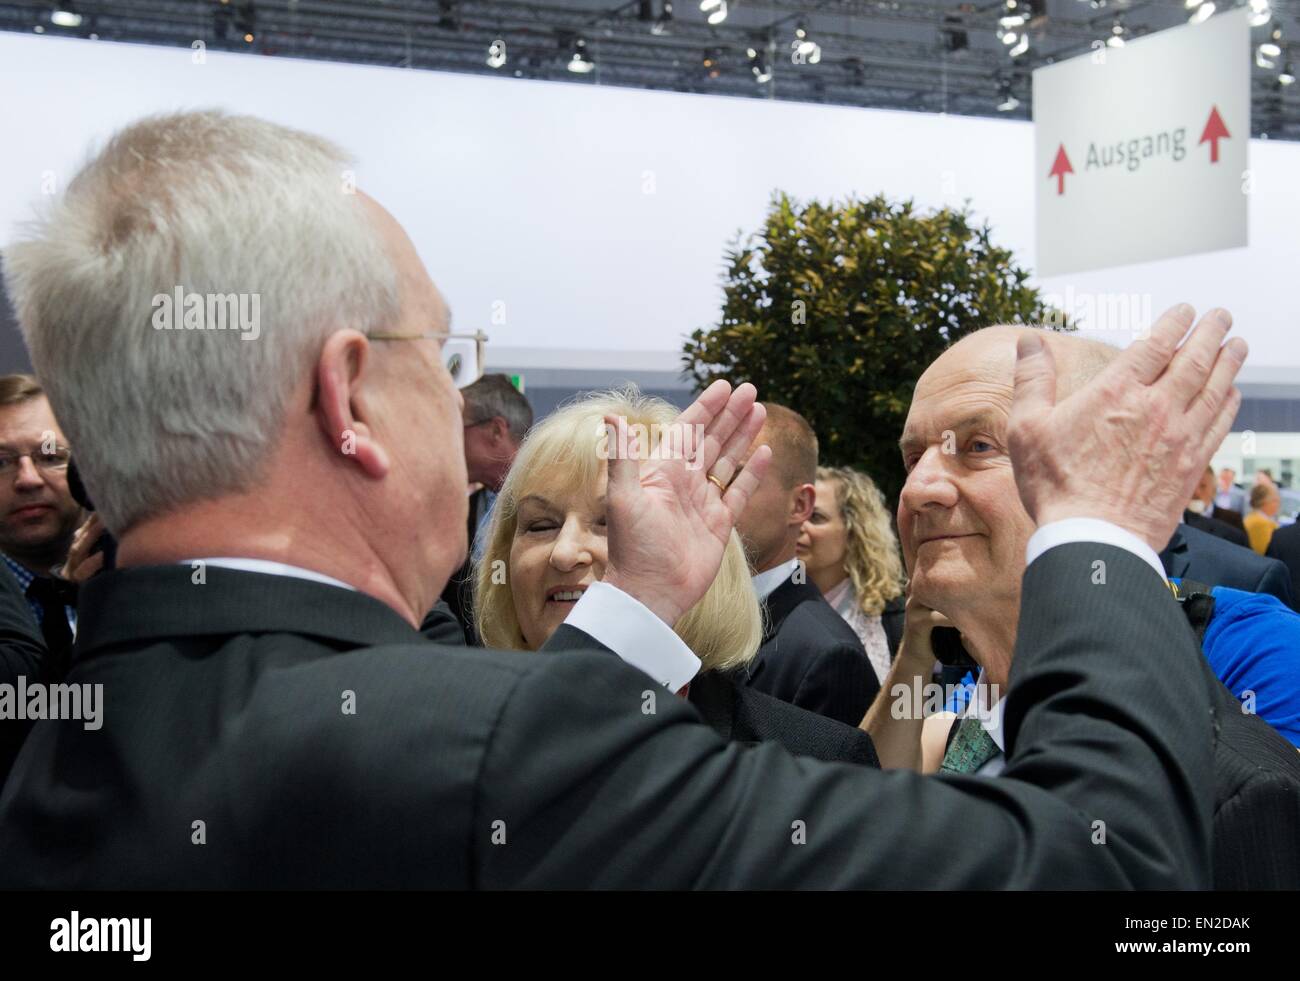 Chairman of the supervisory board of Volkwagen AG, Ferdinand Piech (R), his wife and VW supervisory board member, Ursula Piech (C), stand before the start of the Volkswagen AG general meeting, while Volkswagen CEO Martin Winterkorn gestures towards the exit sign, in Hanover, Germany, 25 April 2015. Photo: JULIAN STRATENSCHULTE/dpa Stock Photo